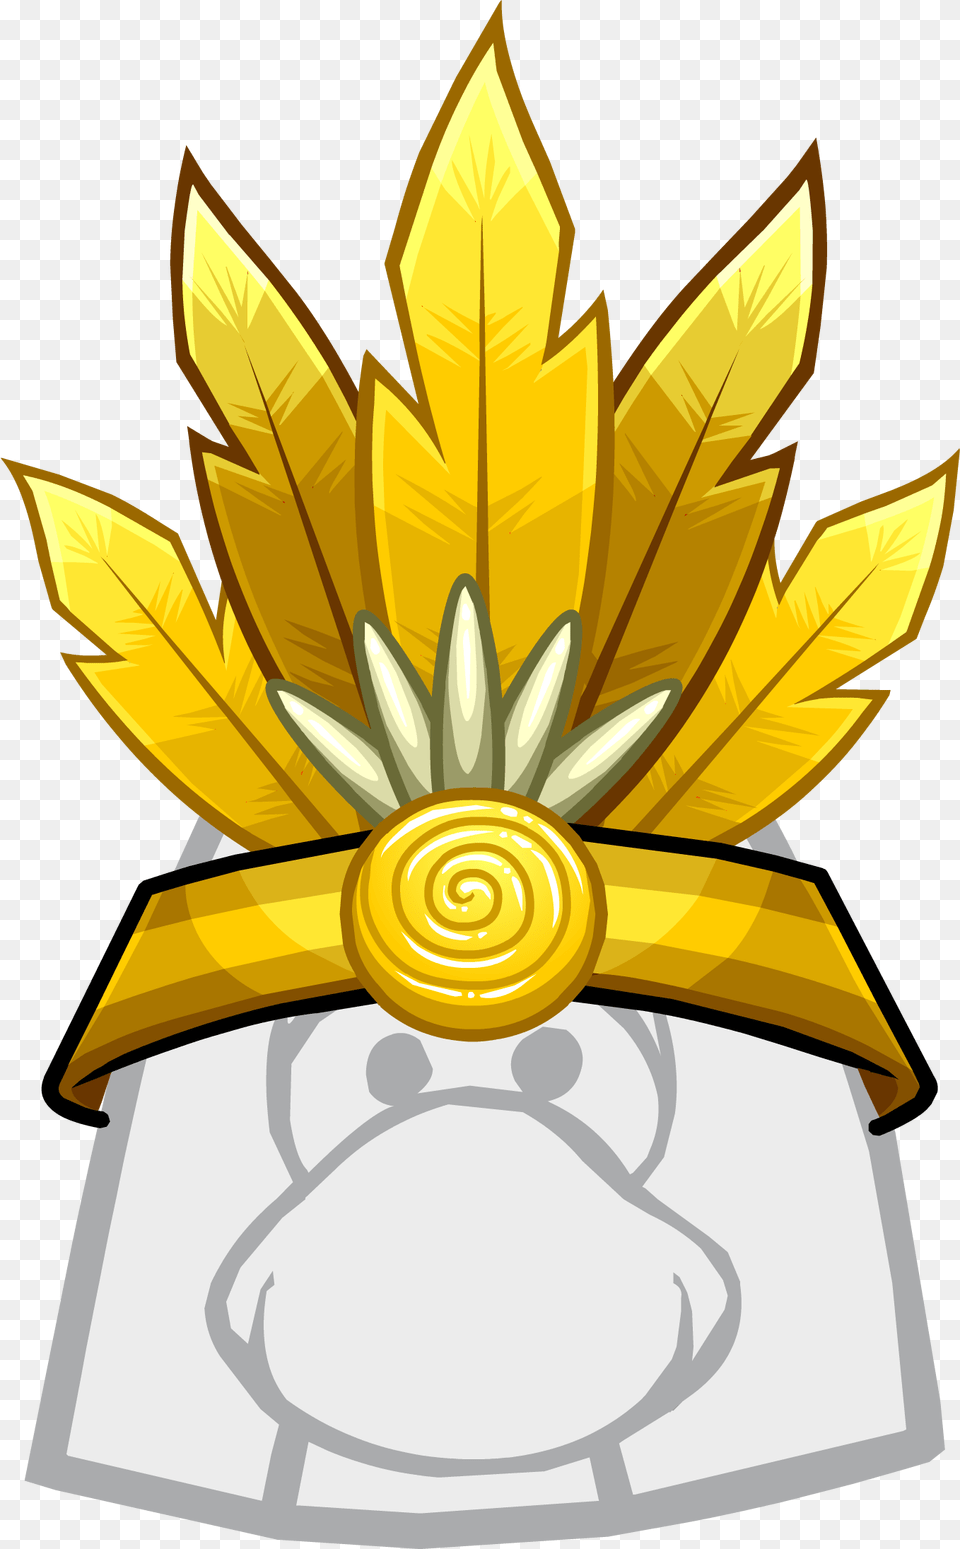 Club Penguin Rewritten Wiki Club Penguin With Hair, Gold, Accessories, Jewelry, Crown Free Transparent Png